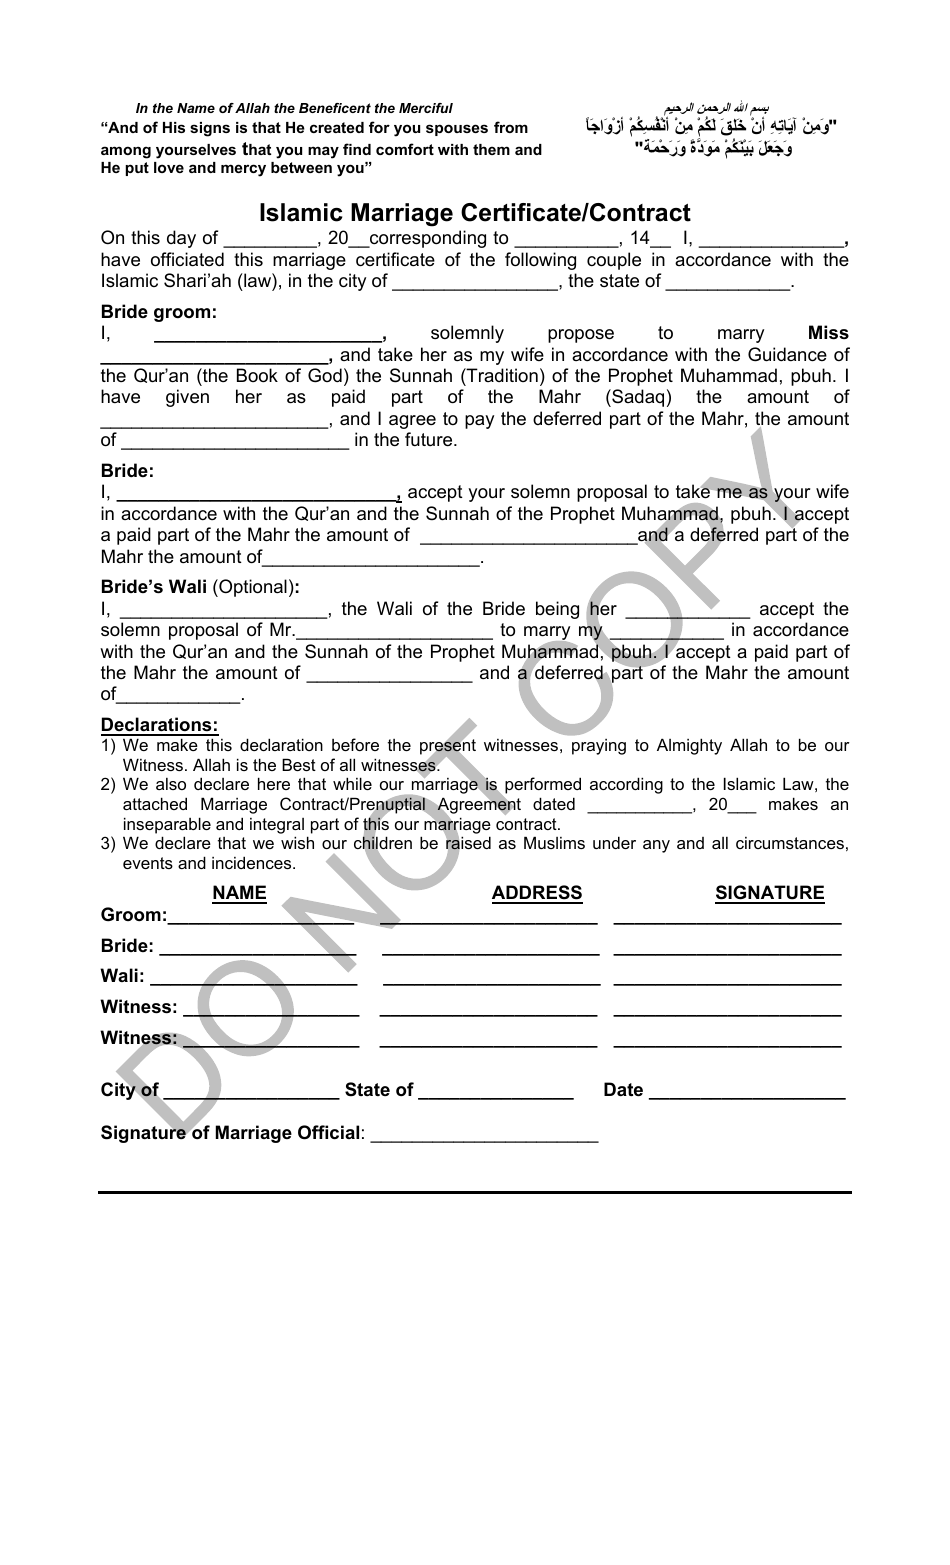 Islamic Marriage Certificate/Contract Template Fill Out, Sign Online